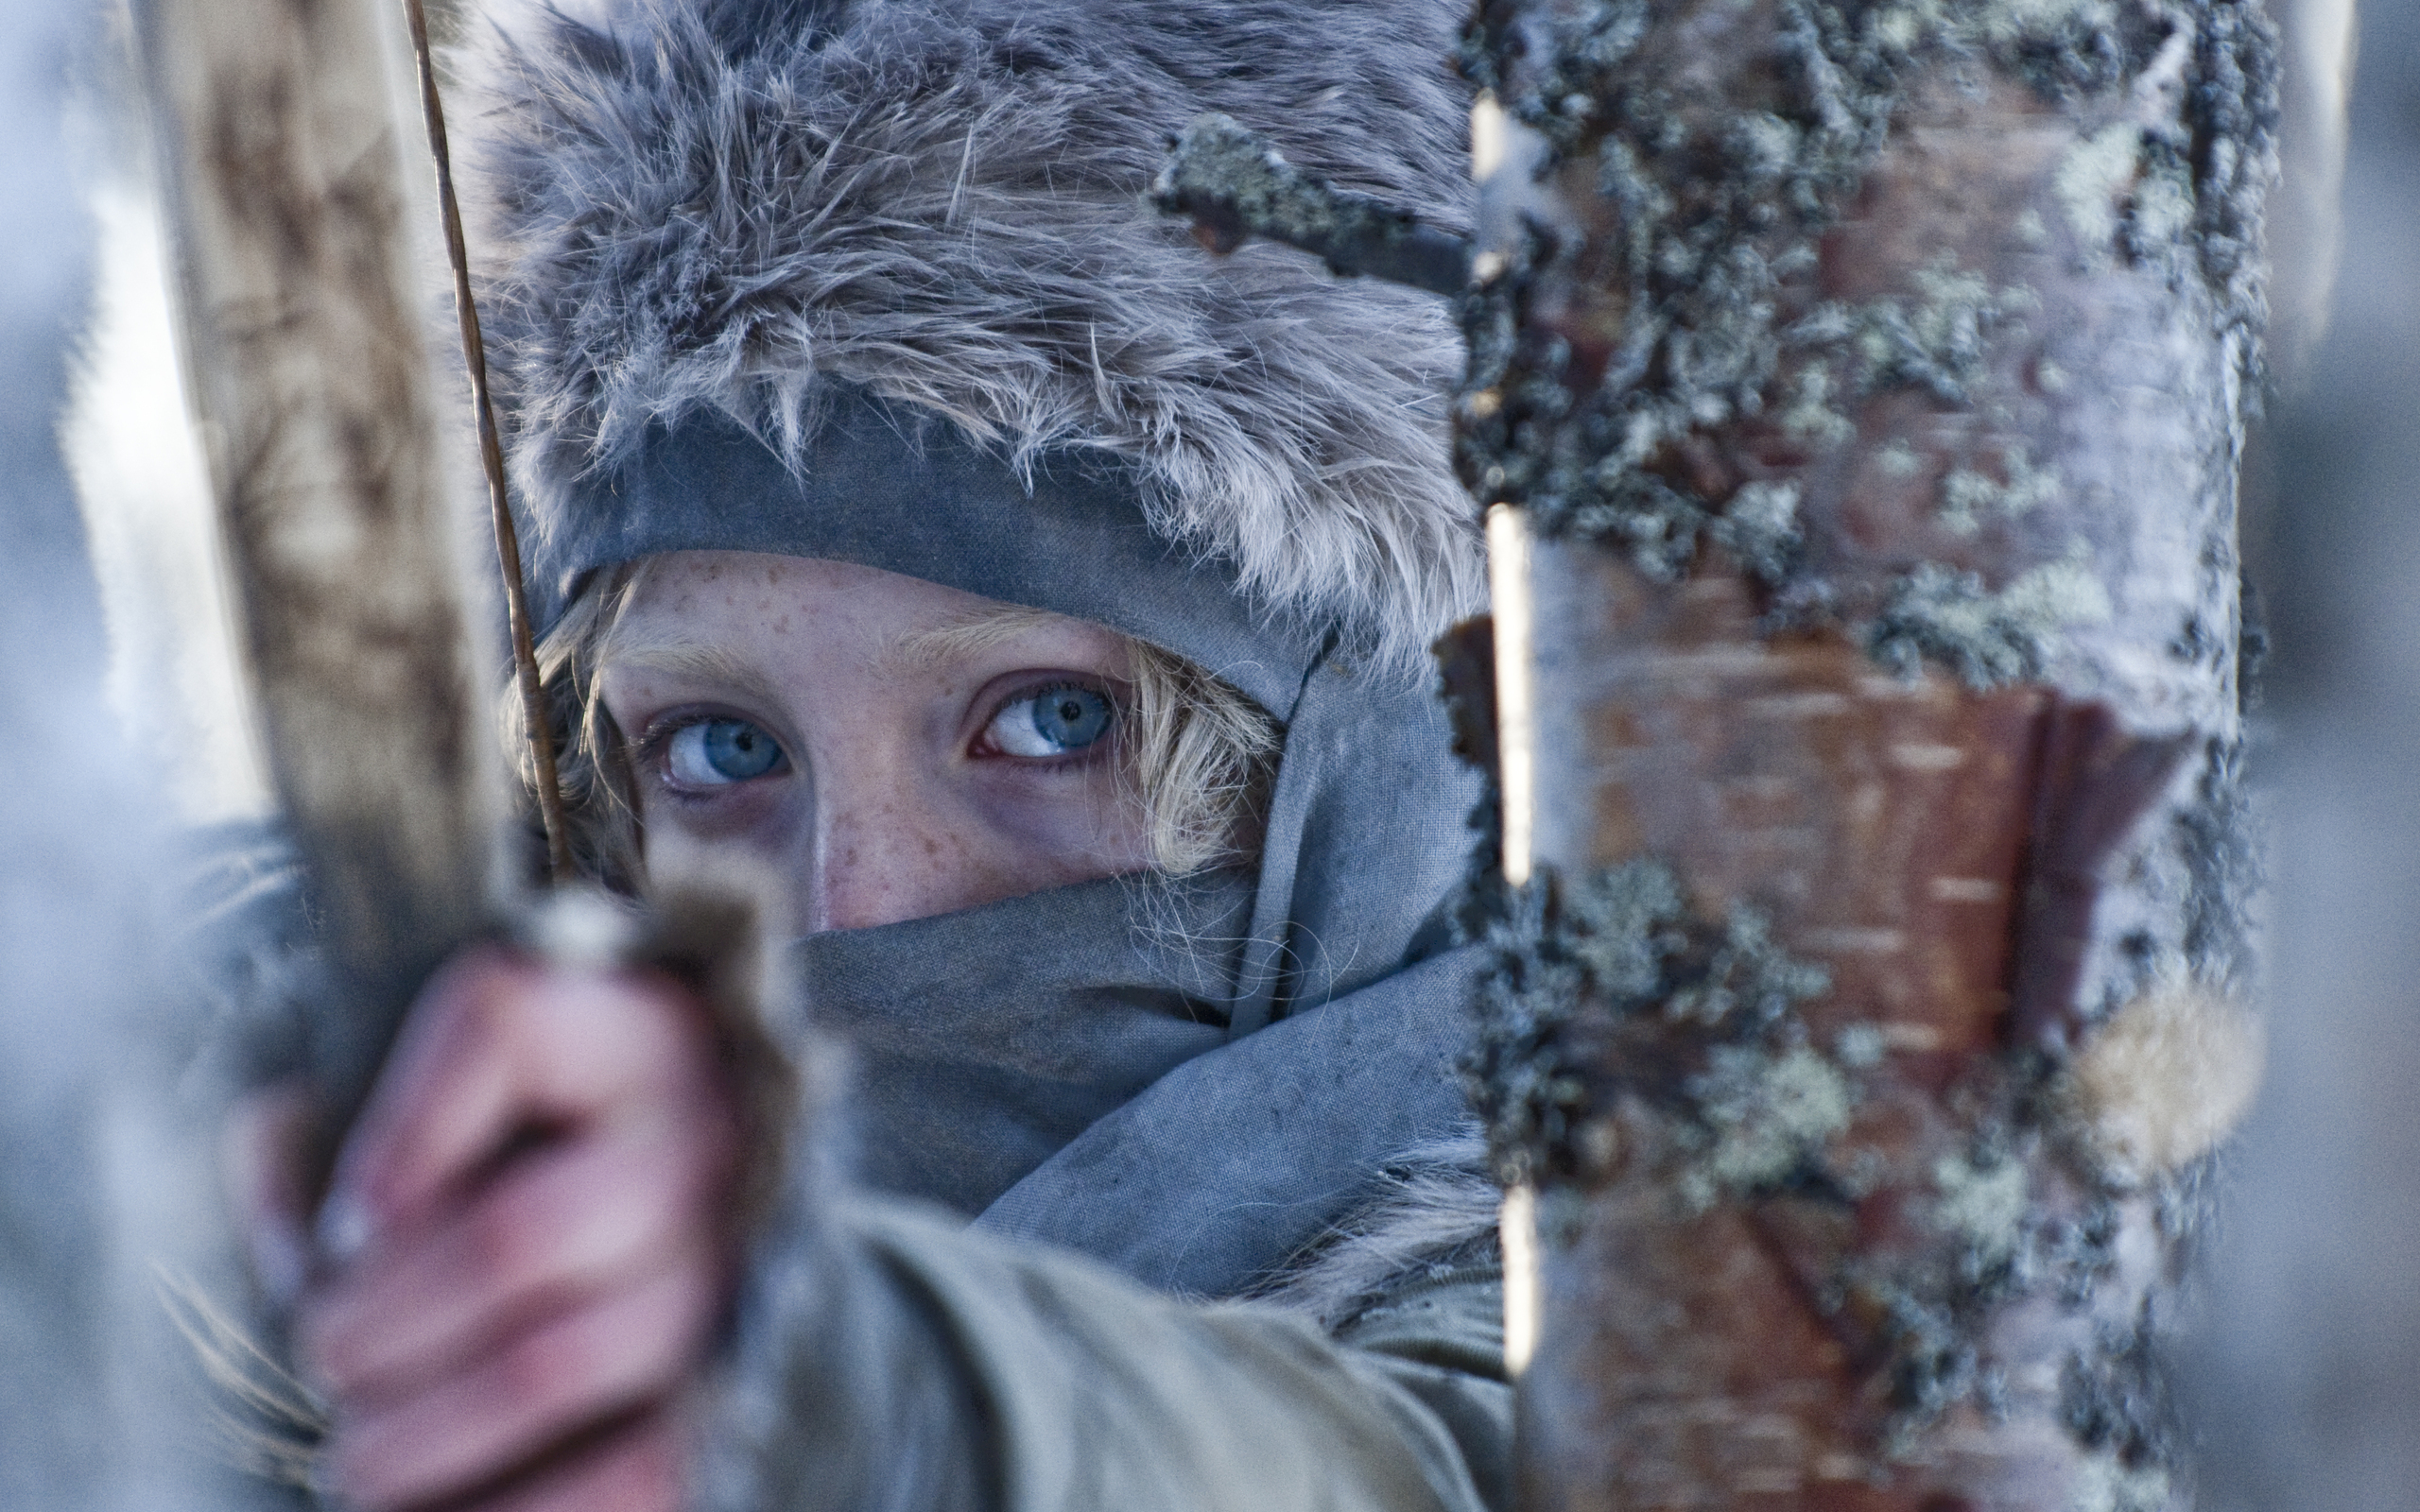 Saoirse Ronan as Hanna, in an action-packed movie scene.